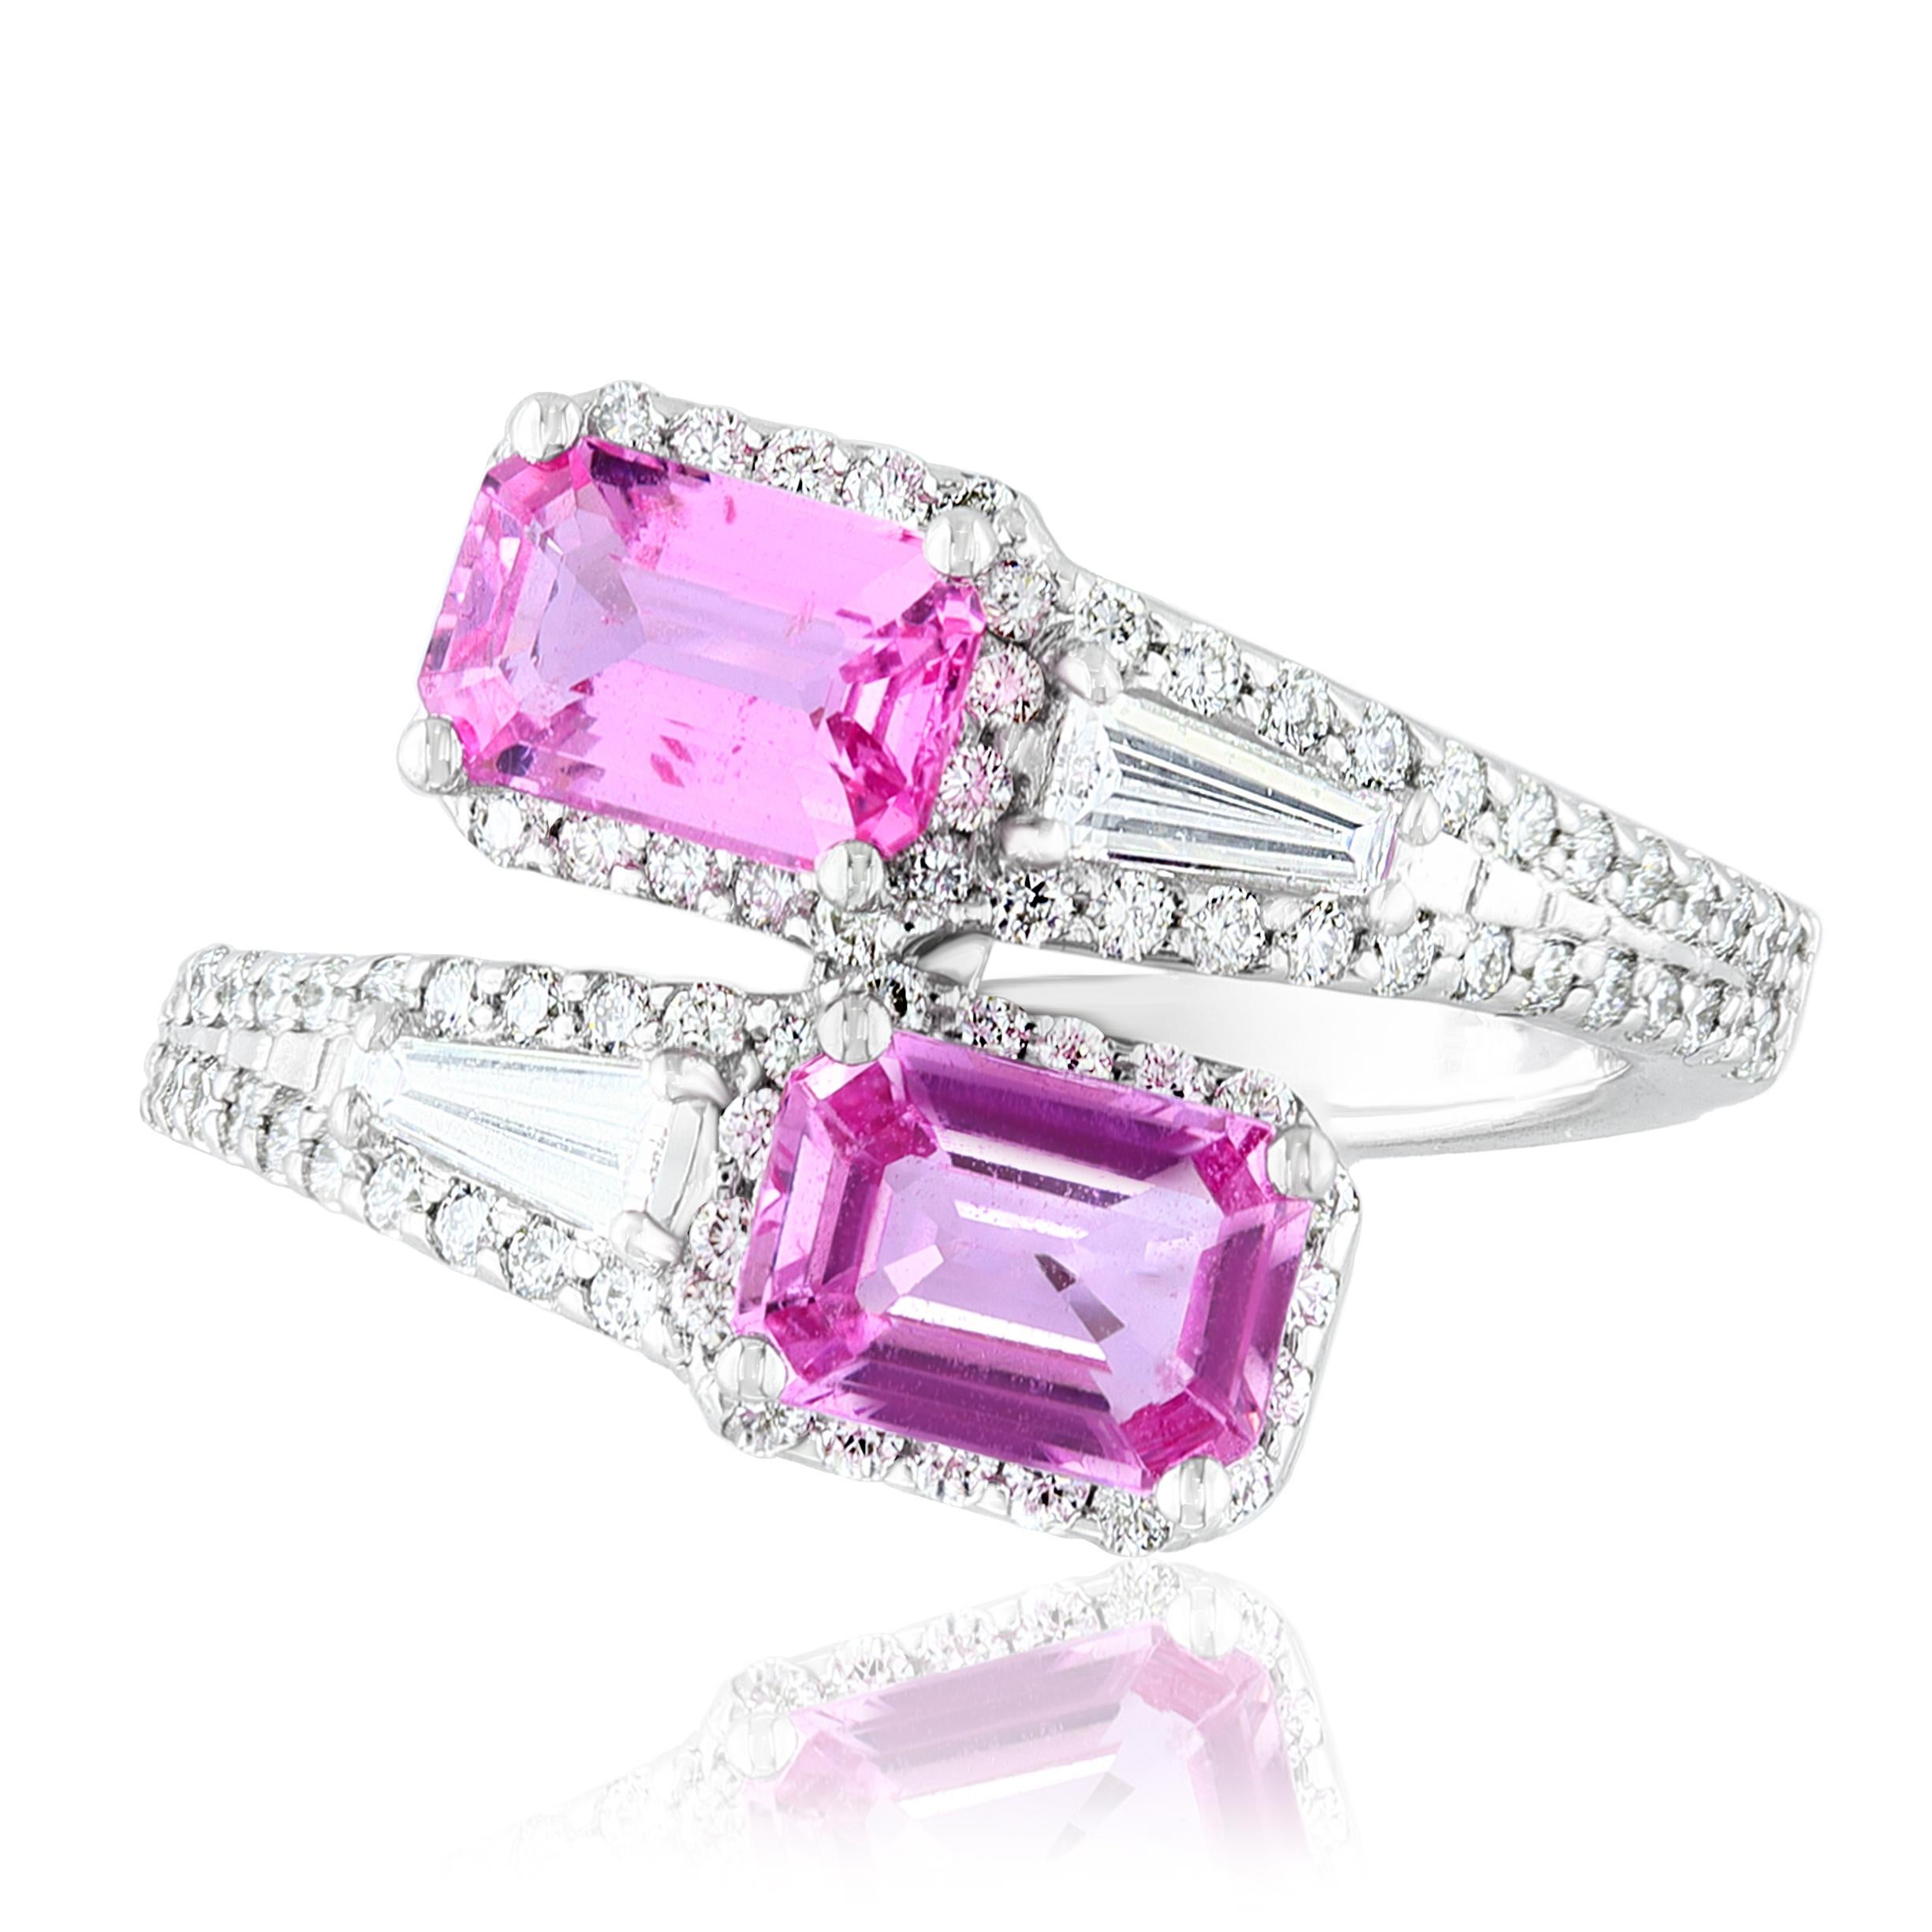 The stunning forever-together Toi et Moi ring features 2 Emerald cut Pink Sapphires embraced by east to west 2 baguette diamonds weigh and 84 round diamonds halfway to the shank. Handcrafted in 14k White Gold.
2 emerald cut Pink Sapphires in the